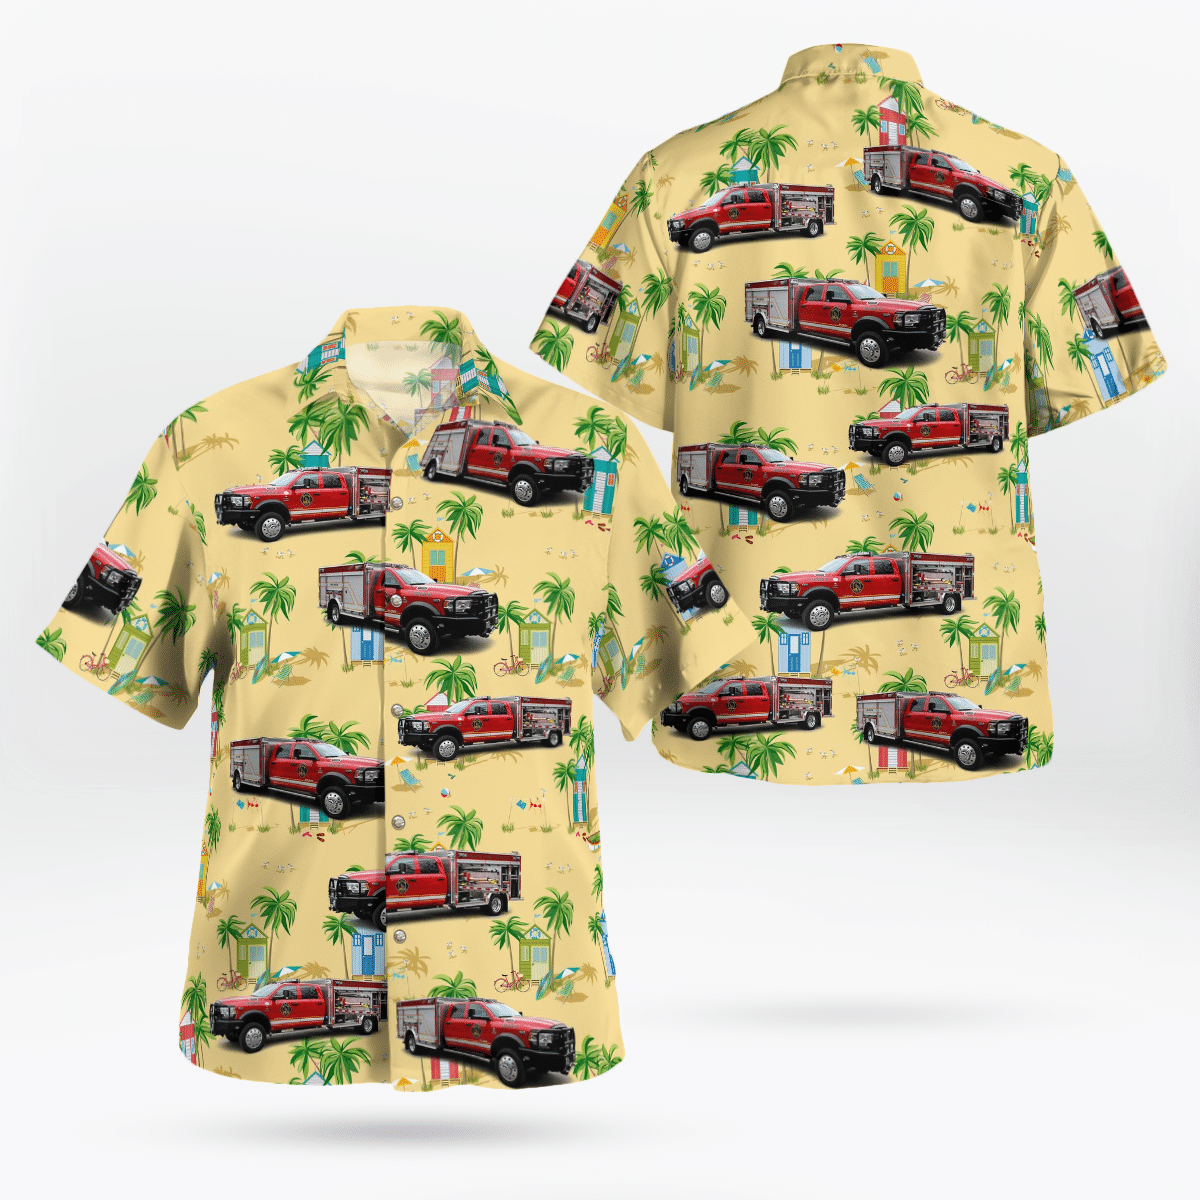 If you want to be noticed, wear These Trendy Hawaiian Shirt 62